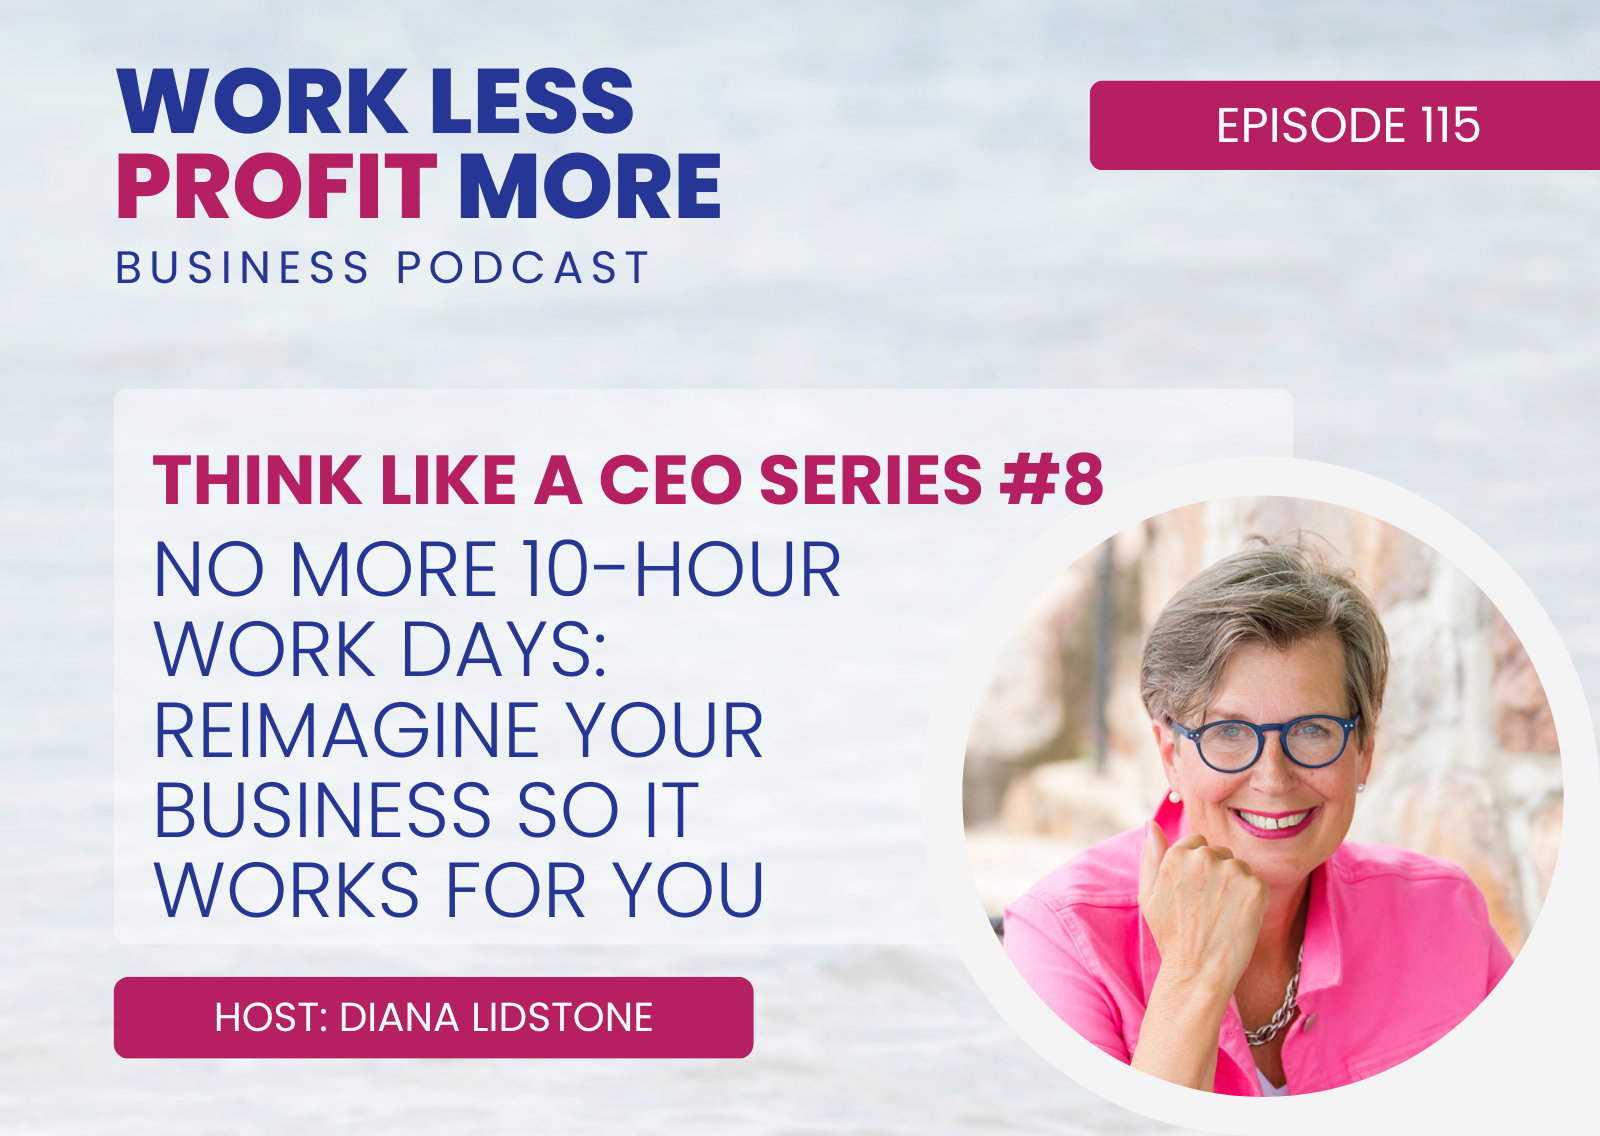 No More 10-Hour Work Days- Reimagine Your Business So It Works For You